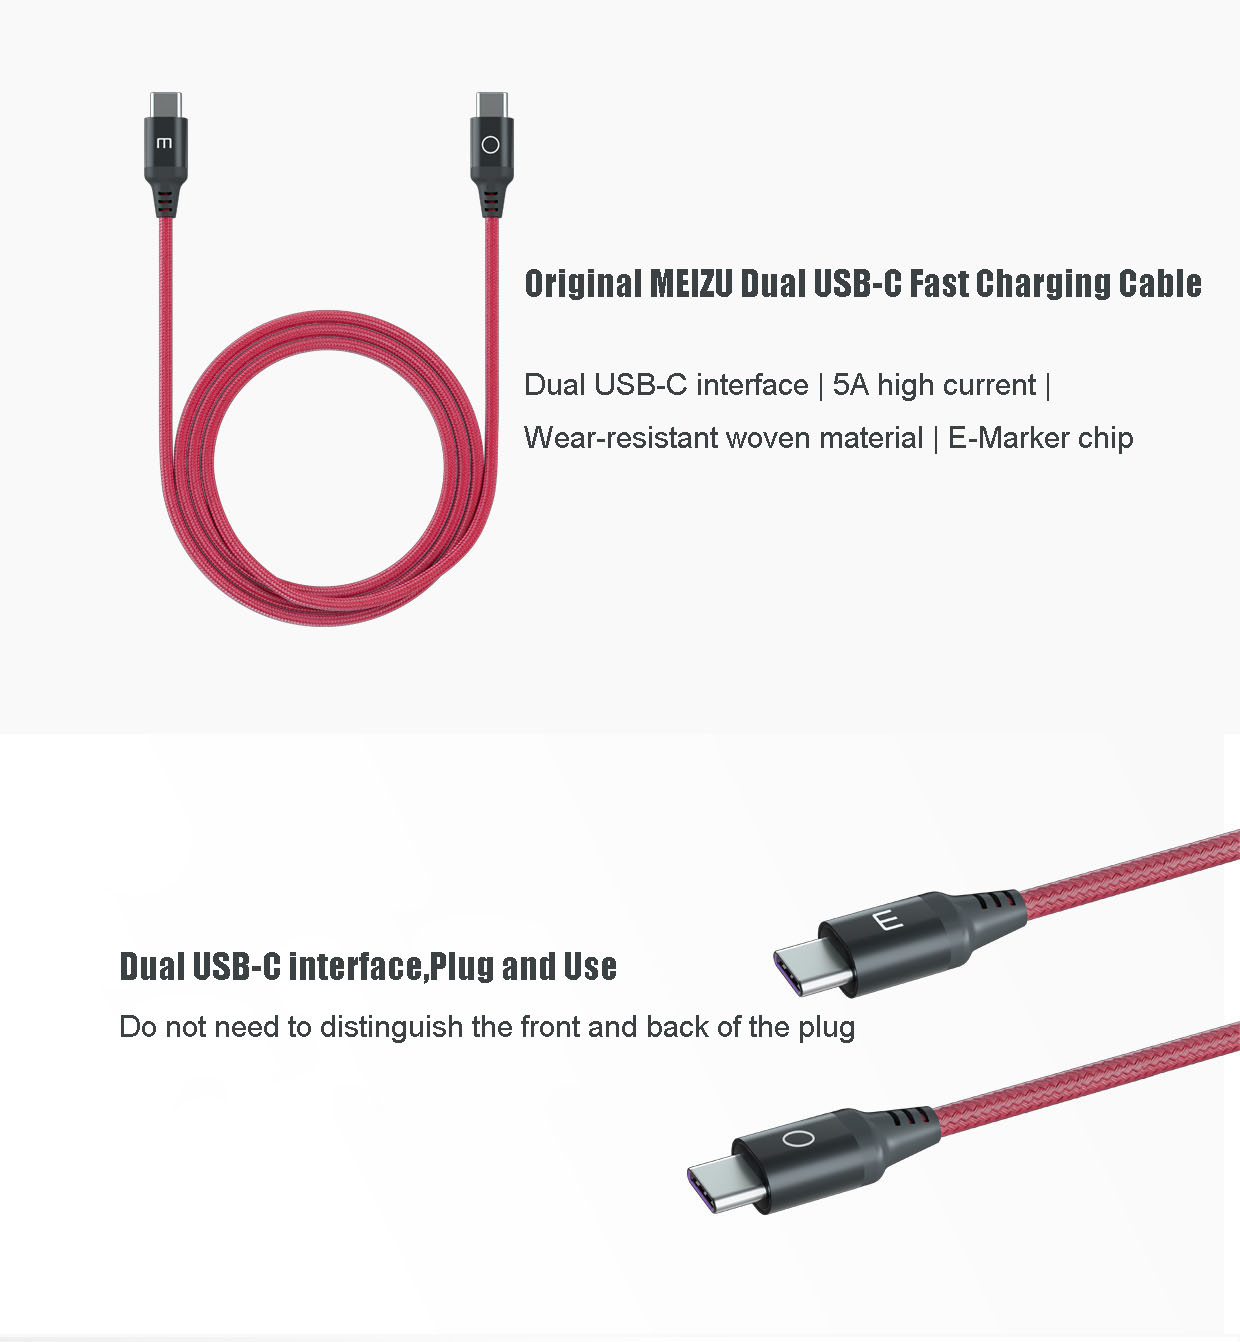 MEIZU Dual USB-C Fast Charging Cable